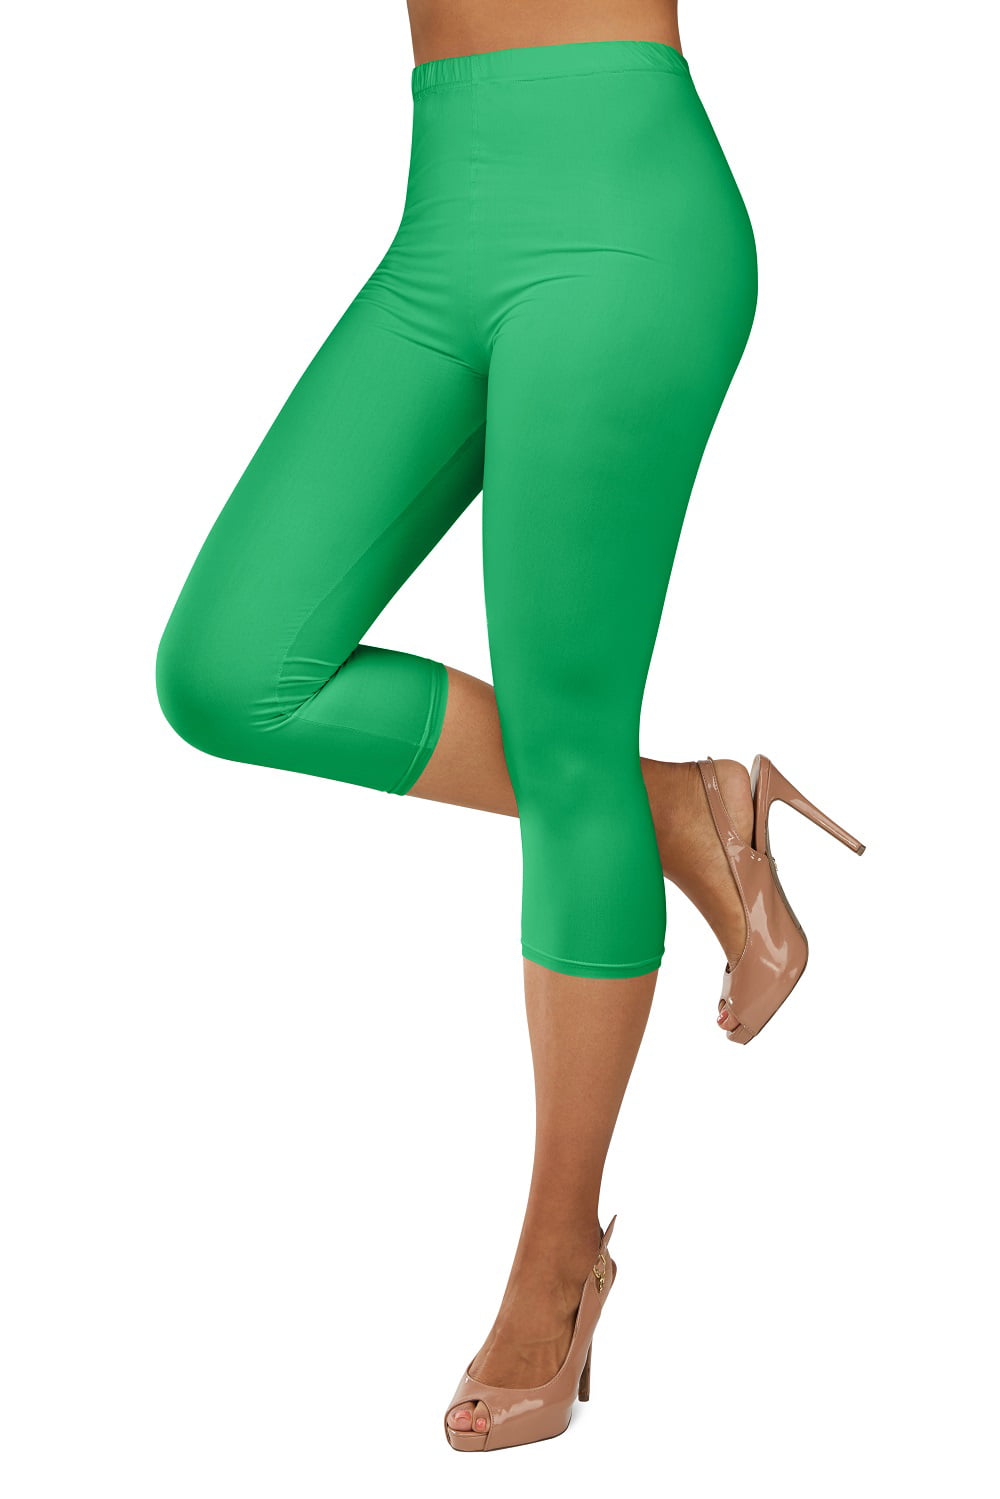 Buttery Smooth Green Camouflage Extra Plus Size Leggings - 3X-5X